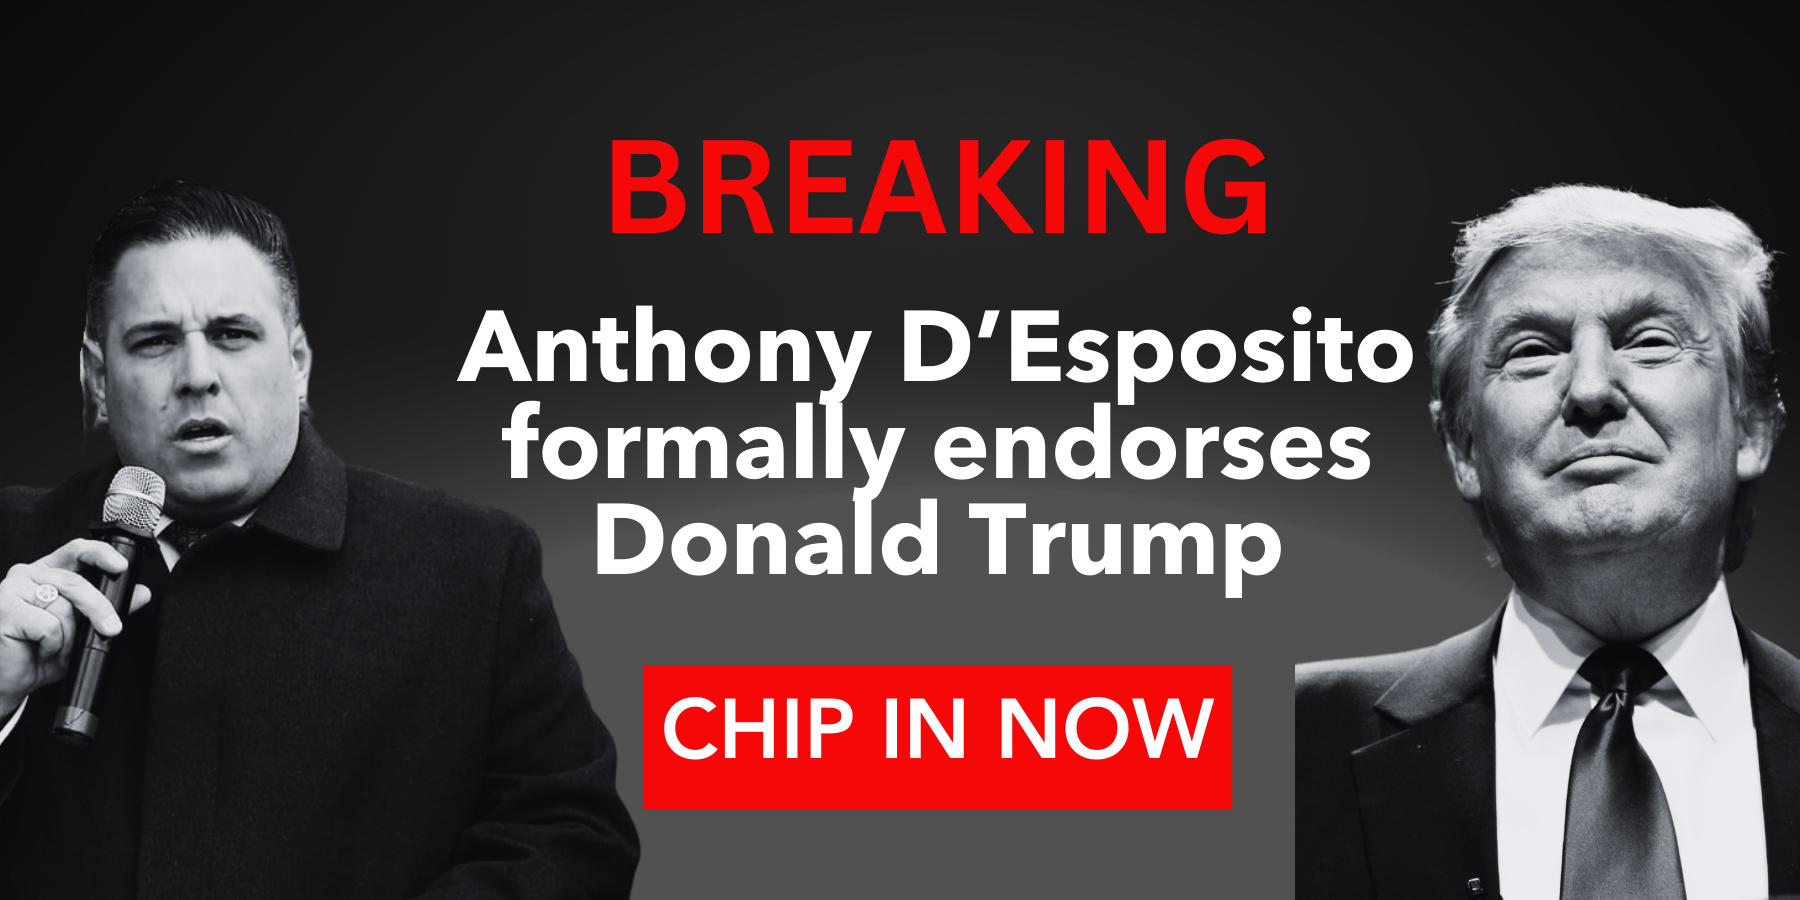 BREAKING: Anthony D'Esposito formally endorsed Donald Trump